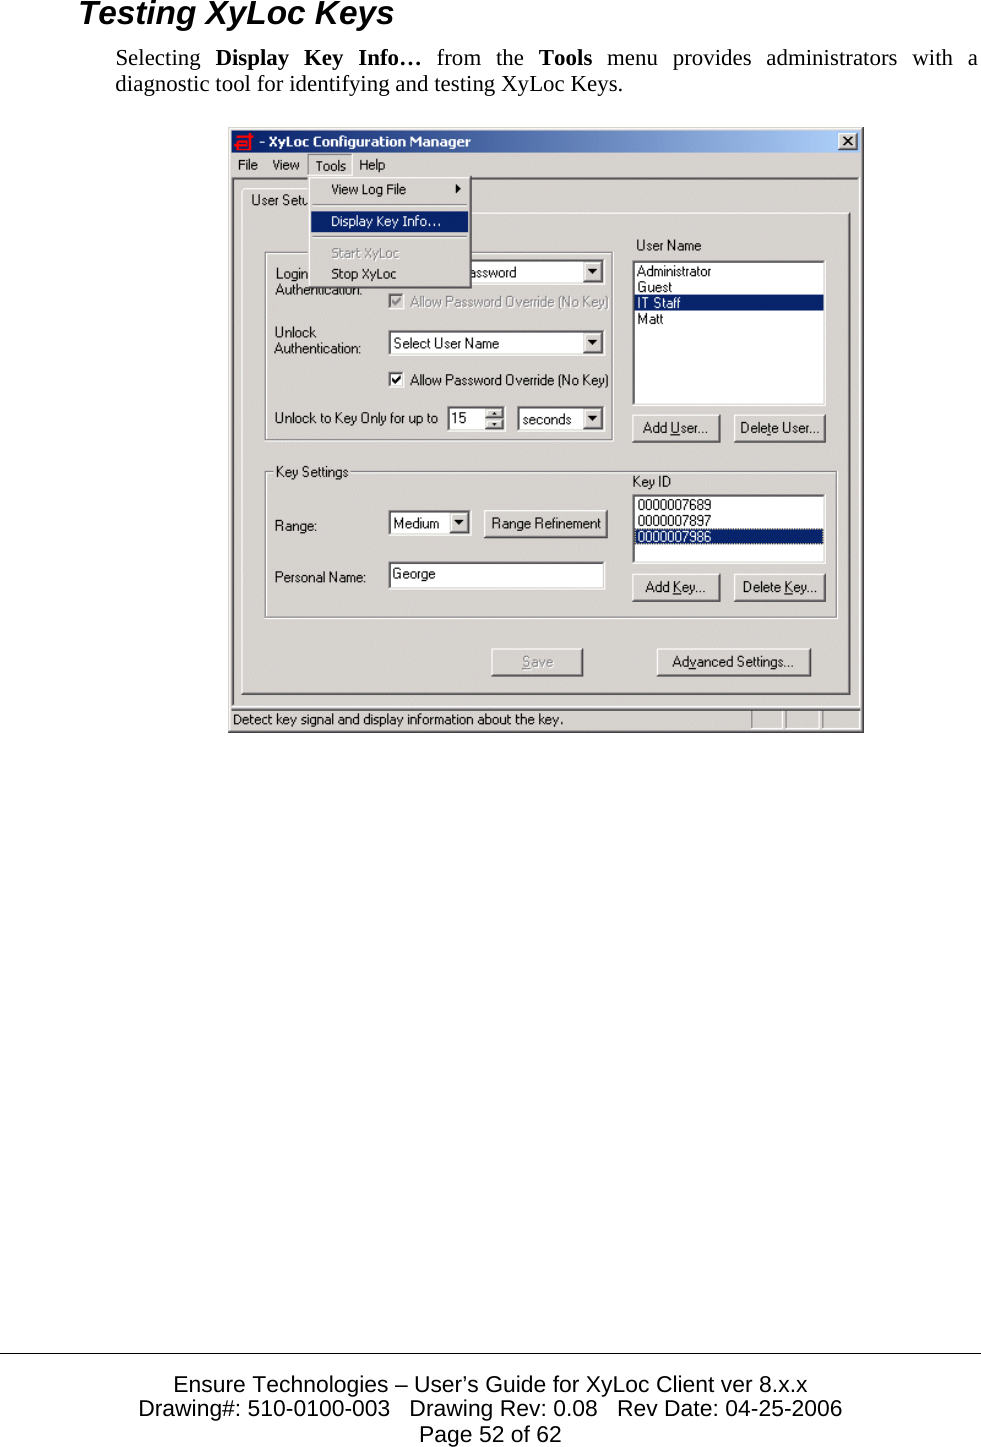  Ensure Technologies – User’s Guide for XyLoc Client ver 8.x.x Drawing#: 510-0100-003   Drawing Rev: 0.08   Rev Date: 04-25-2006 Page 52 of 62 Testing XyLoc Keys Selecting  Display Key Info… from the Tools menu provides administrators with a diagnostic tool for identifying and testing XyLoc Keys.   